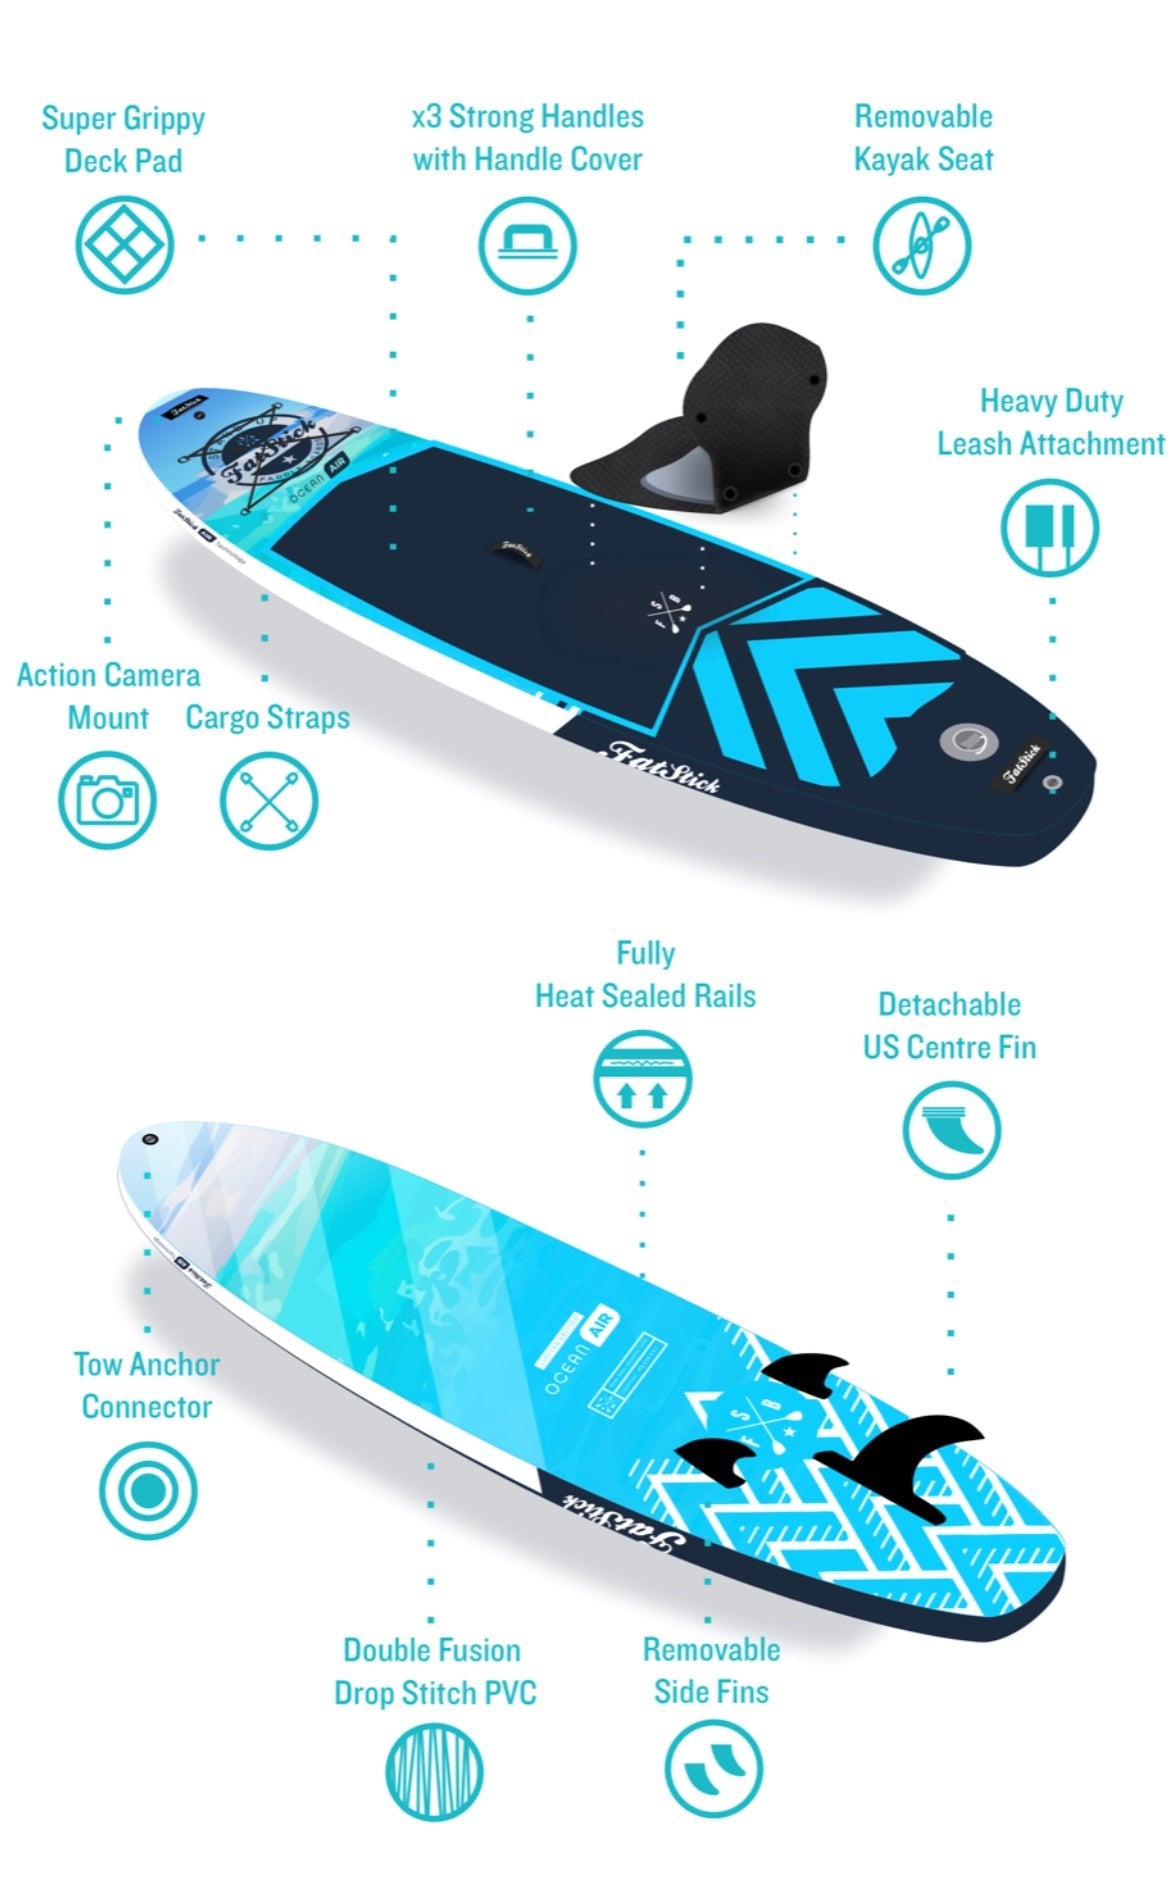 Pure Art 10’6 Inflatable Paddle Board SUP Package - Worthing Watersports - - FatStick